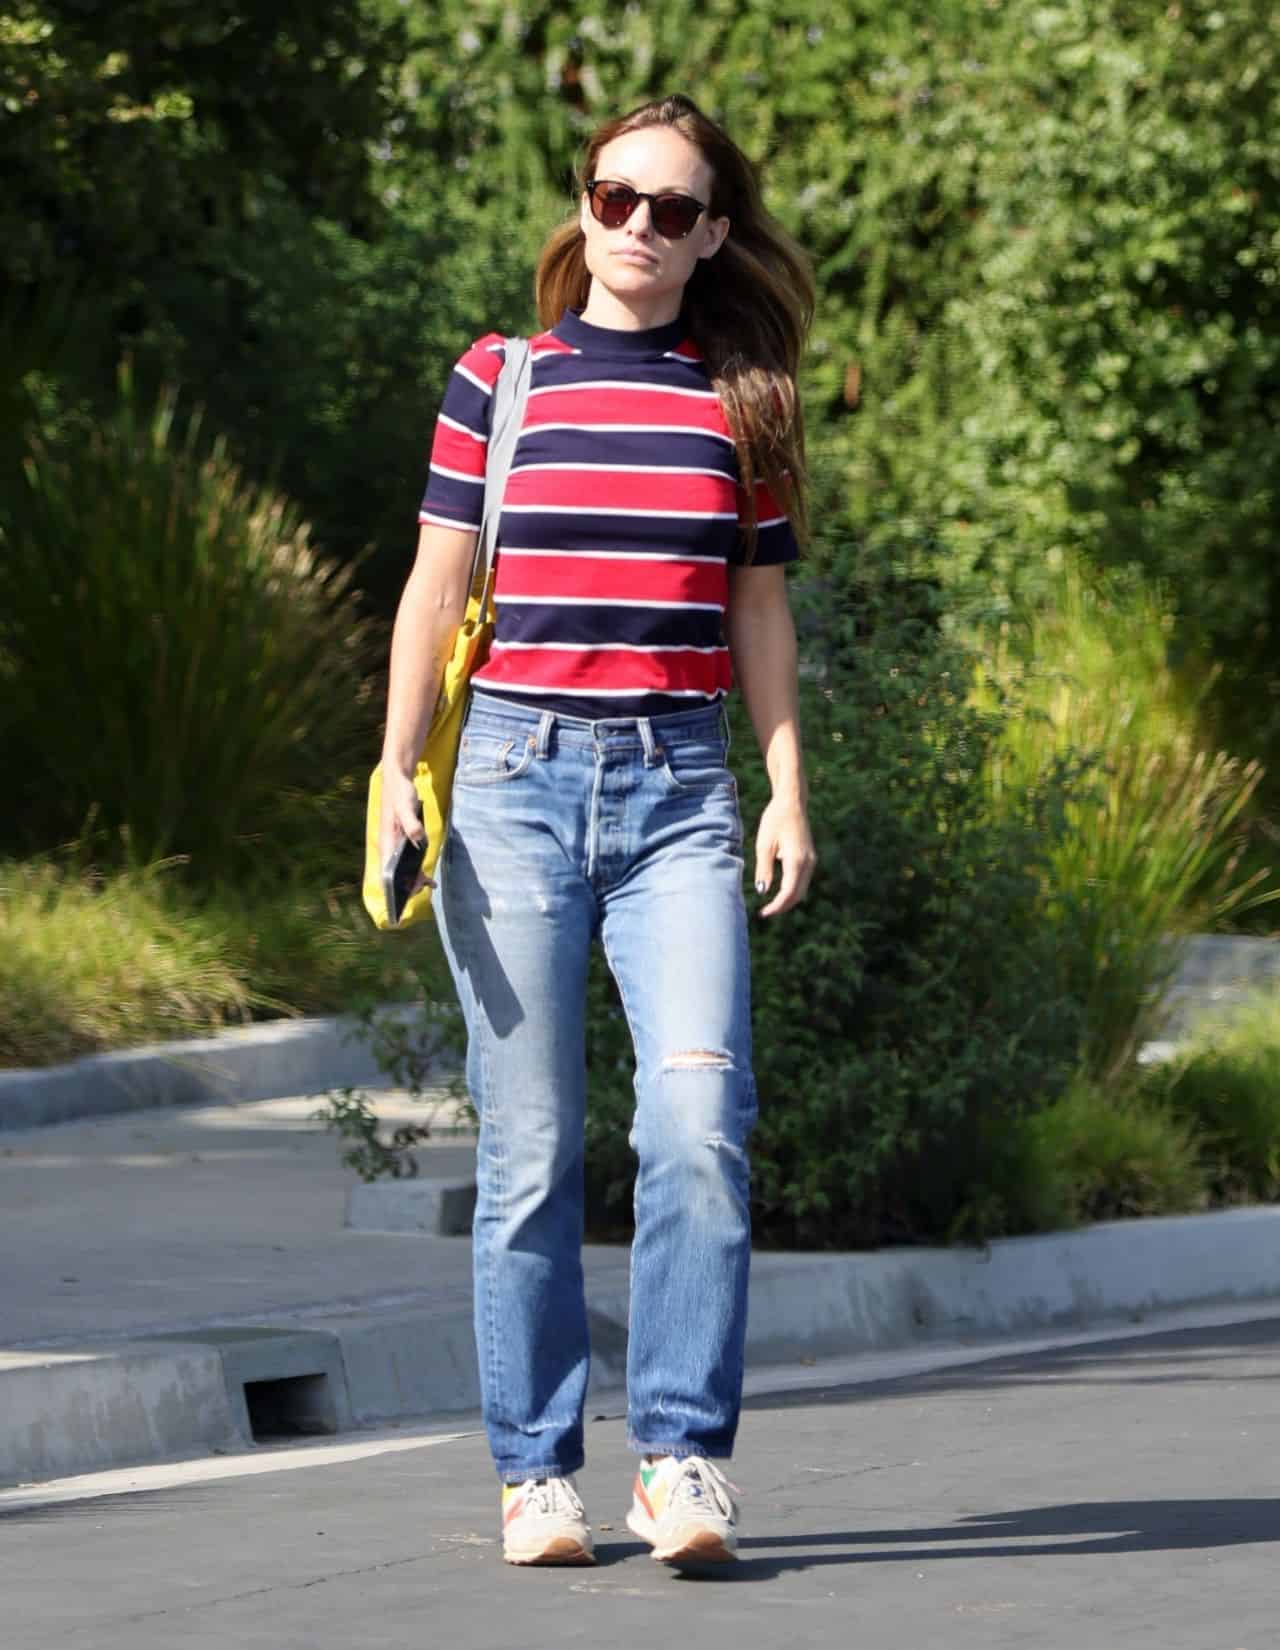 Olivia Wilde Rocks a Red and Navy Striped T-shirt After Meeting in LA